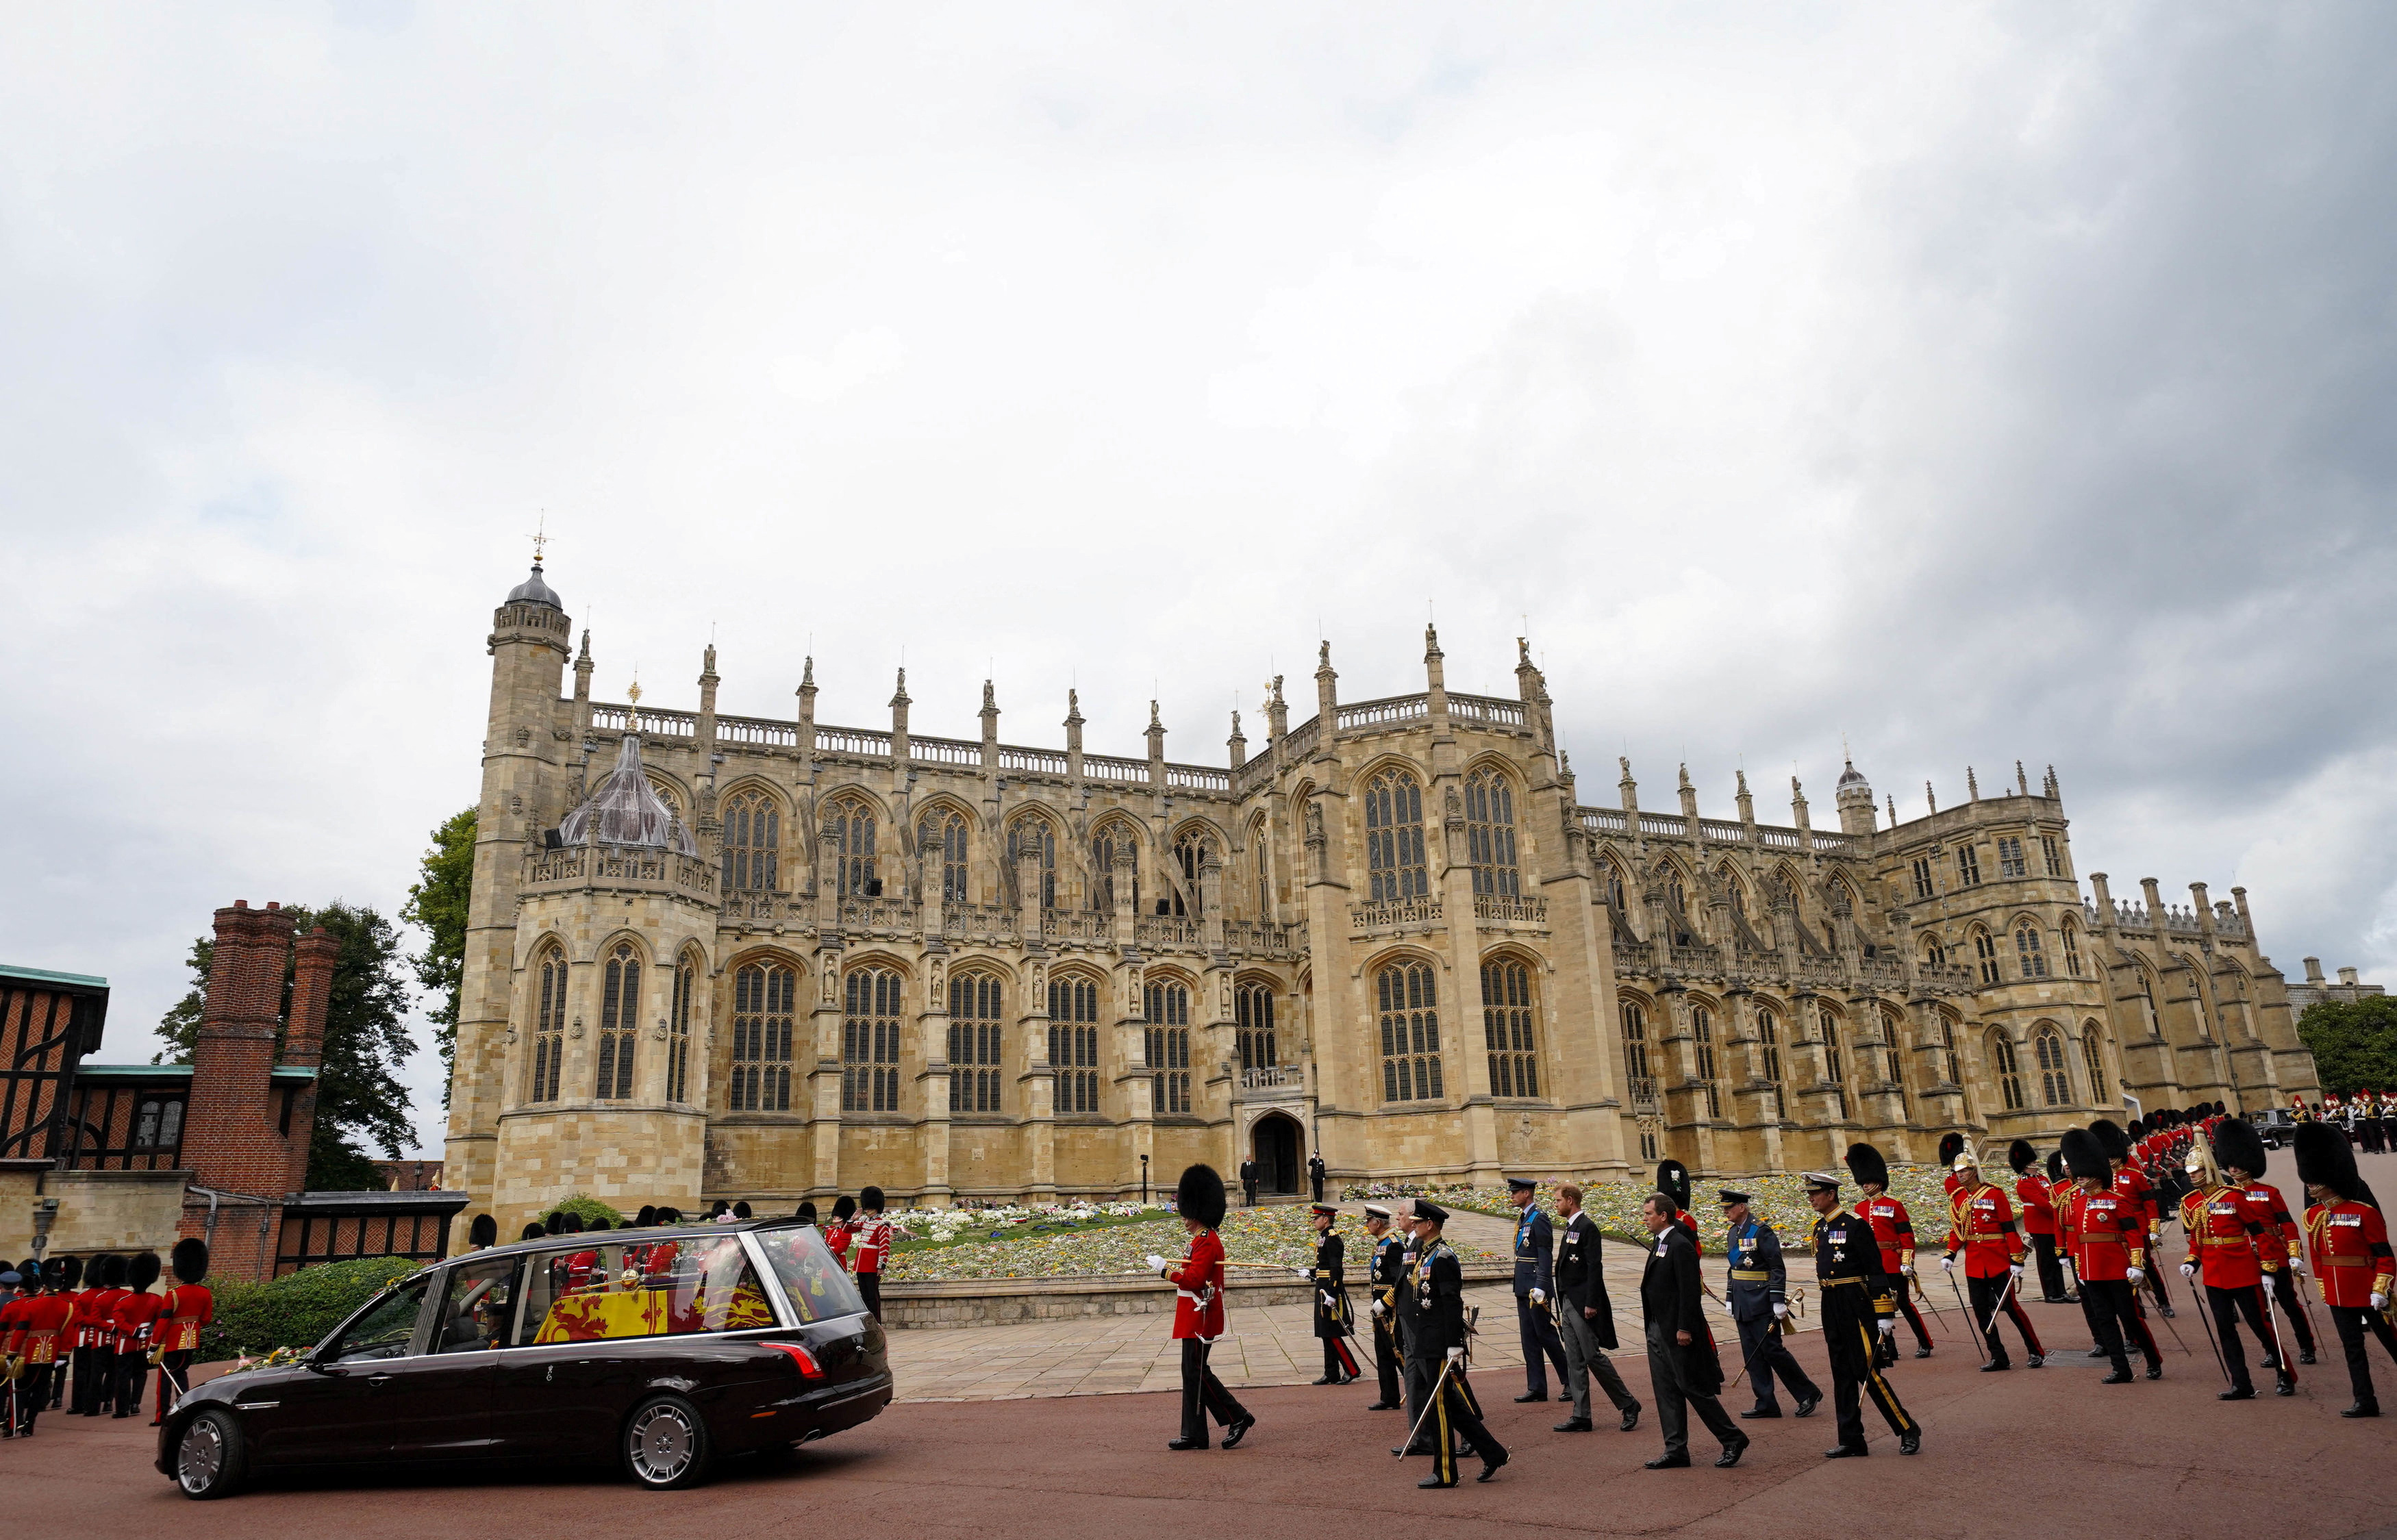 The State Hearse carries the coffin of Queen Elizabeth II through Windsor Castle to a Committal Service at St George's Chapel.